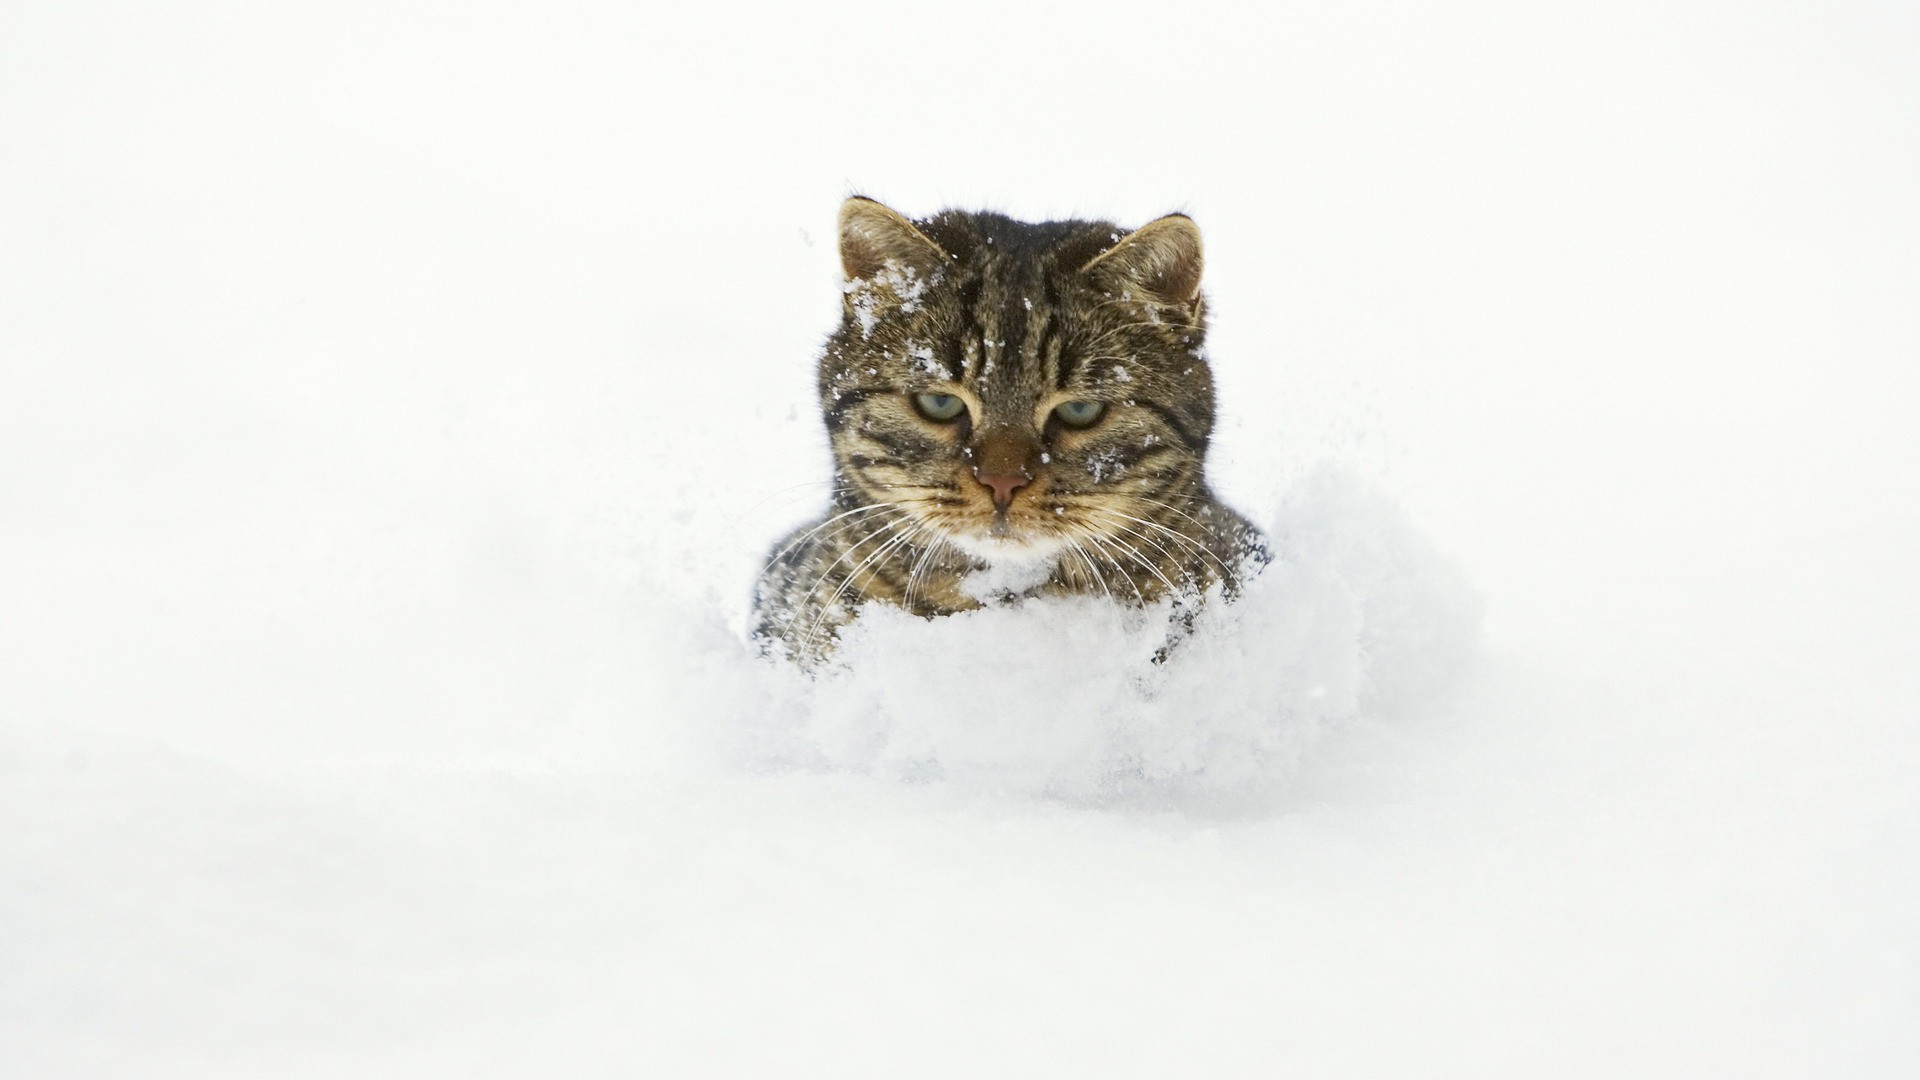 General 1920x1080 cats snow animals frontal view mammals outdoors cold winter